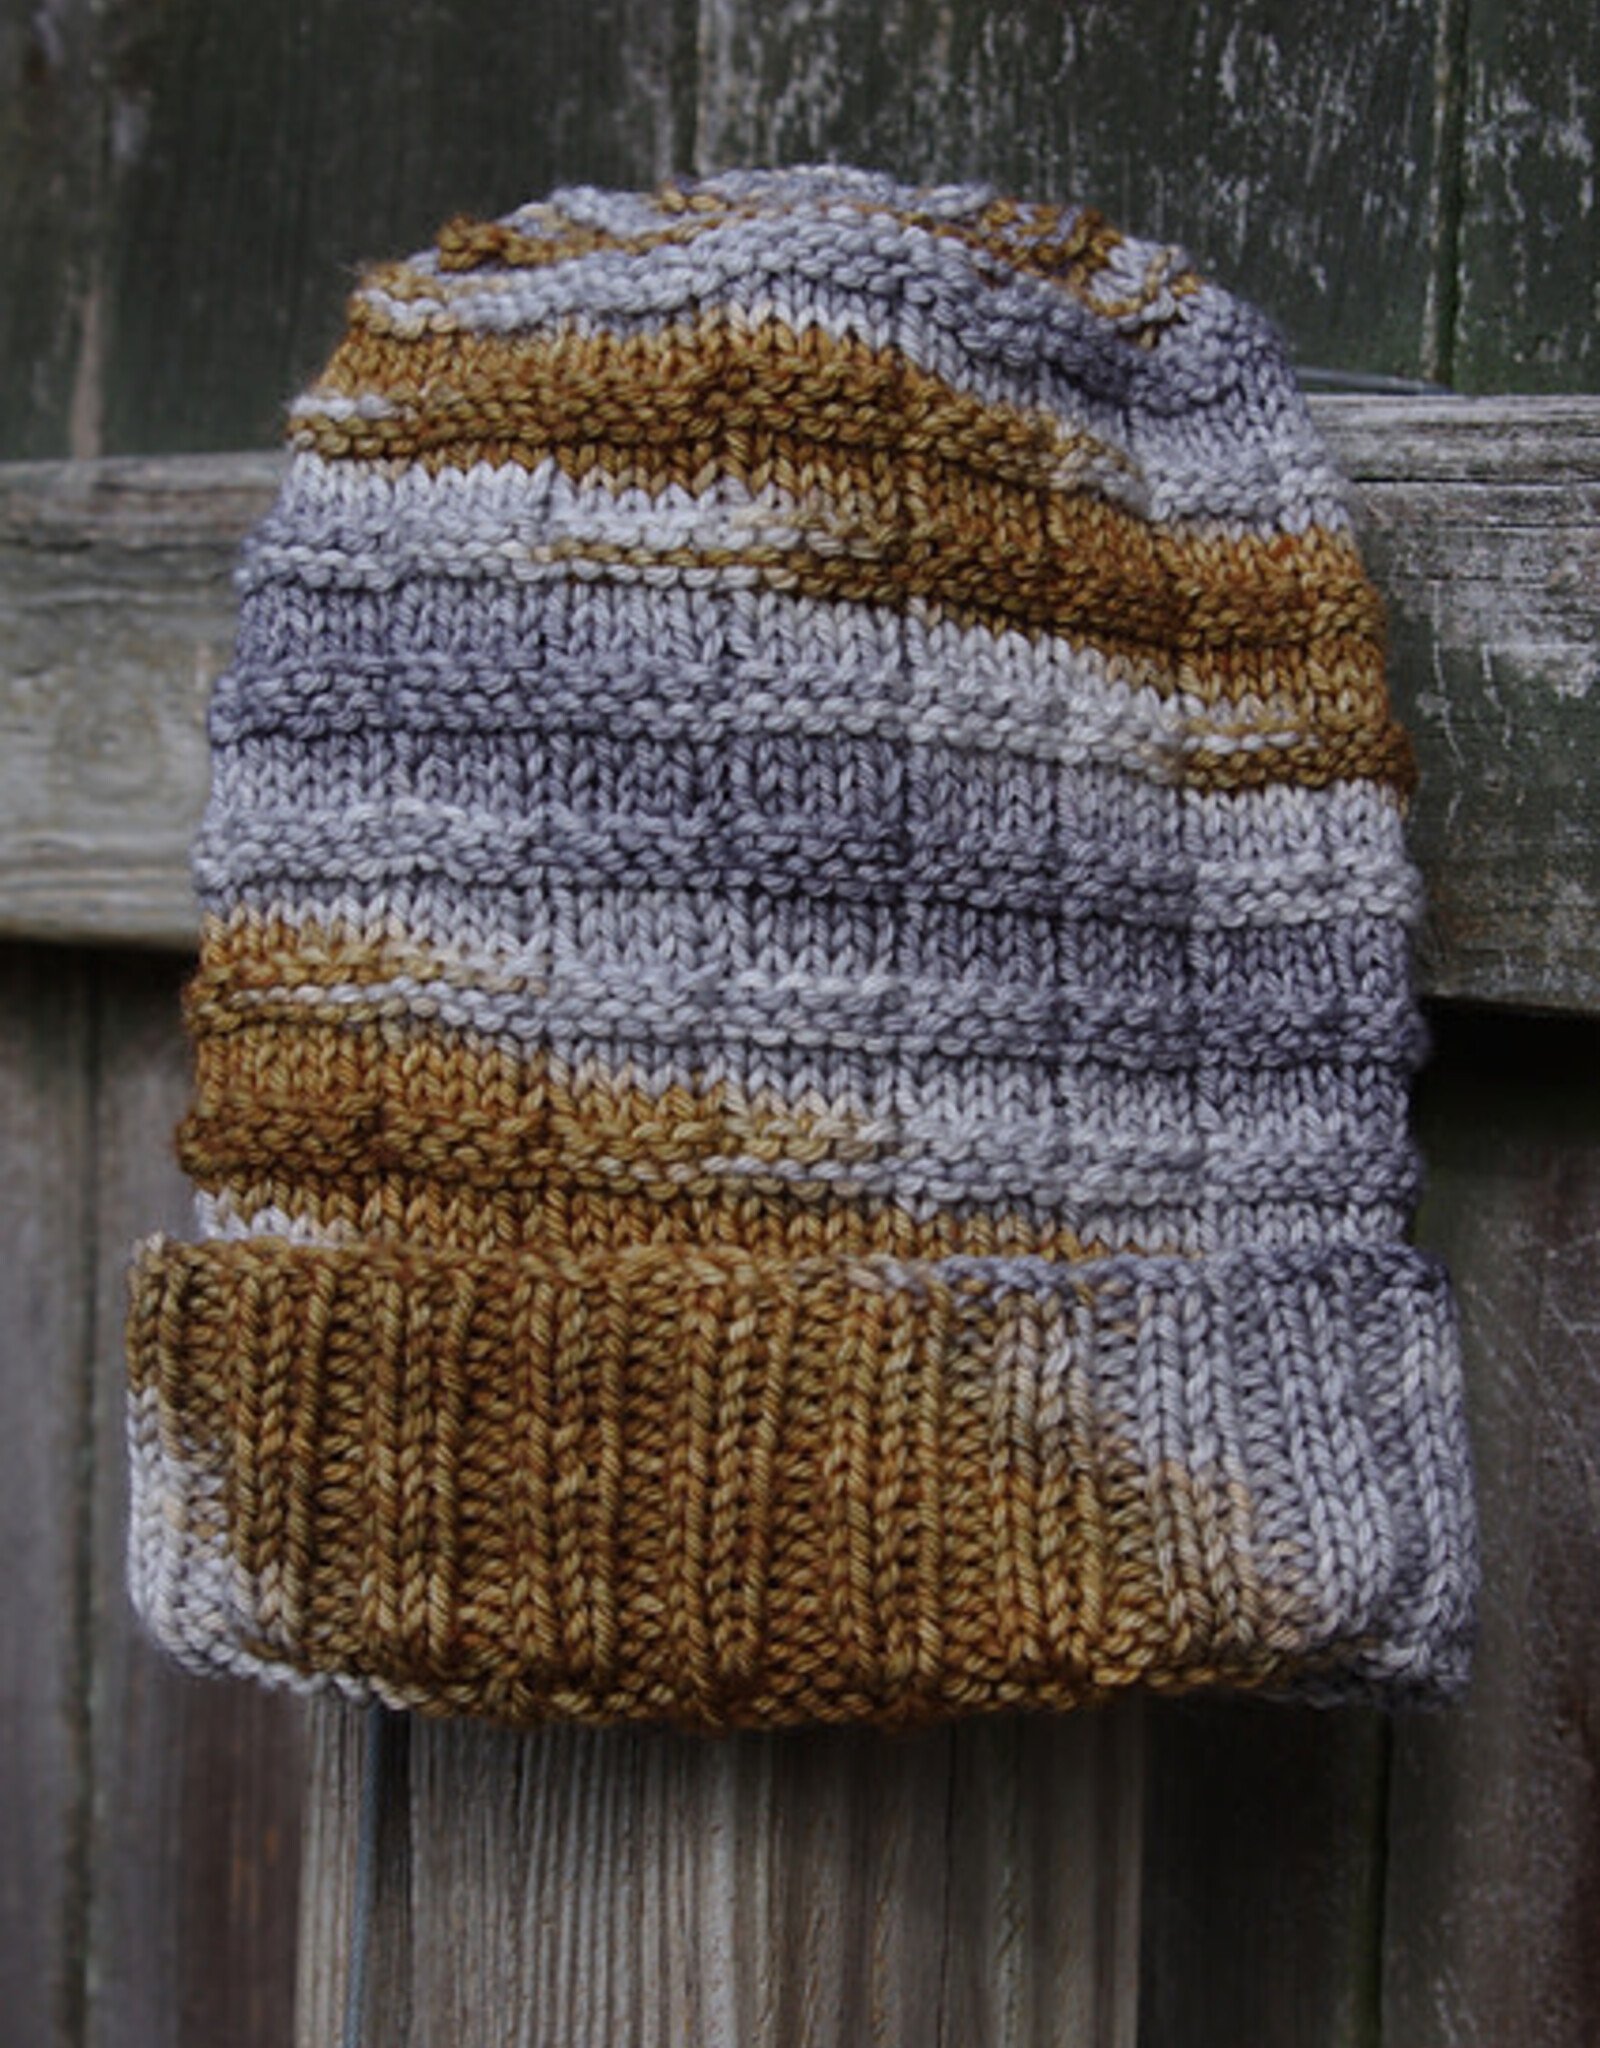 Knitting 103 – Basic Hat / Knit in the Round - Saturday, June 22. 10am-12pm 